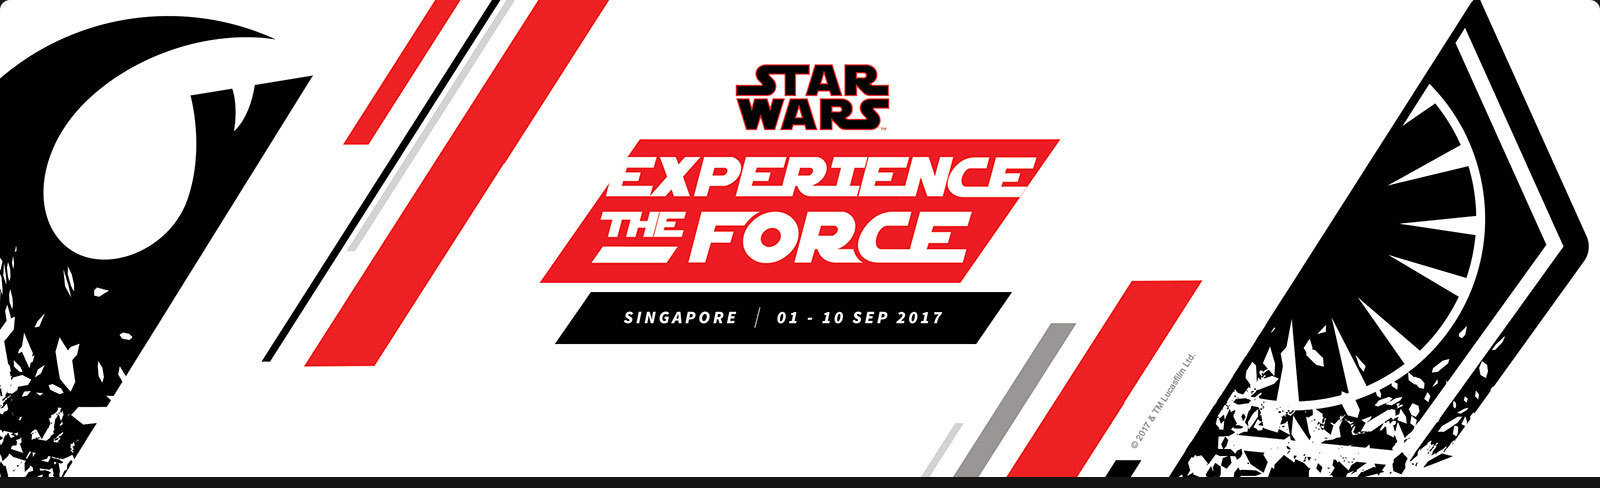 STAR WARS: EXPERIENCE THE FORCE SINGAPORE